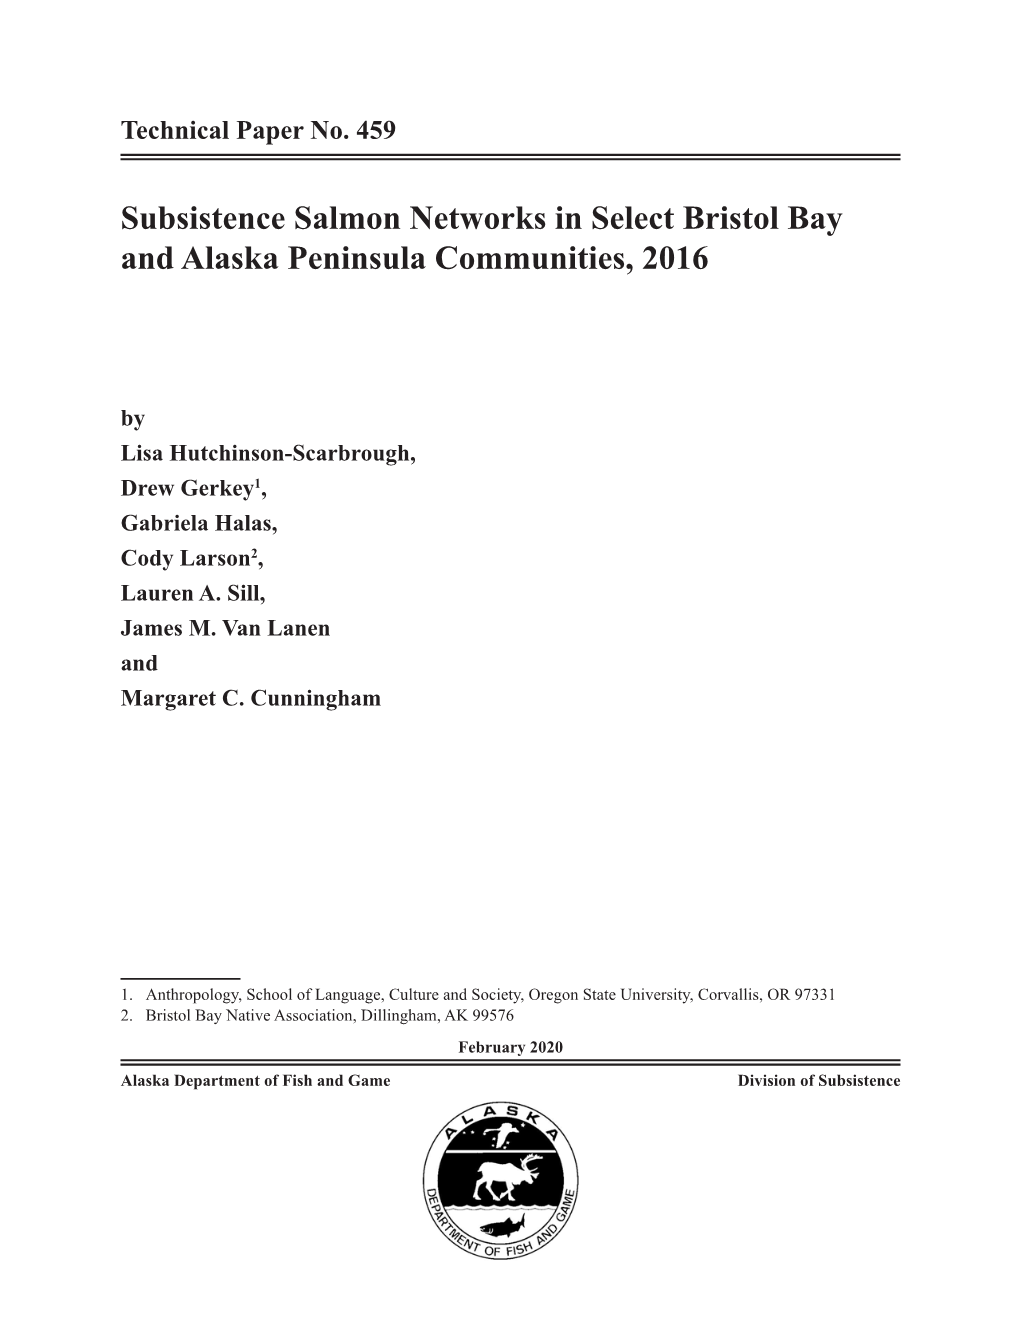 Technical Paper No. 459 Subsistence Salmon Networks in Select Bristol